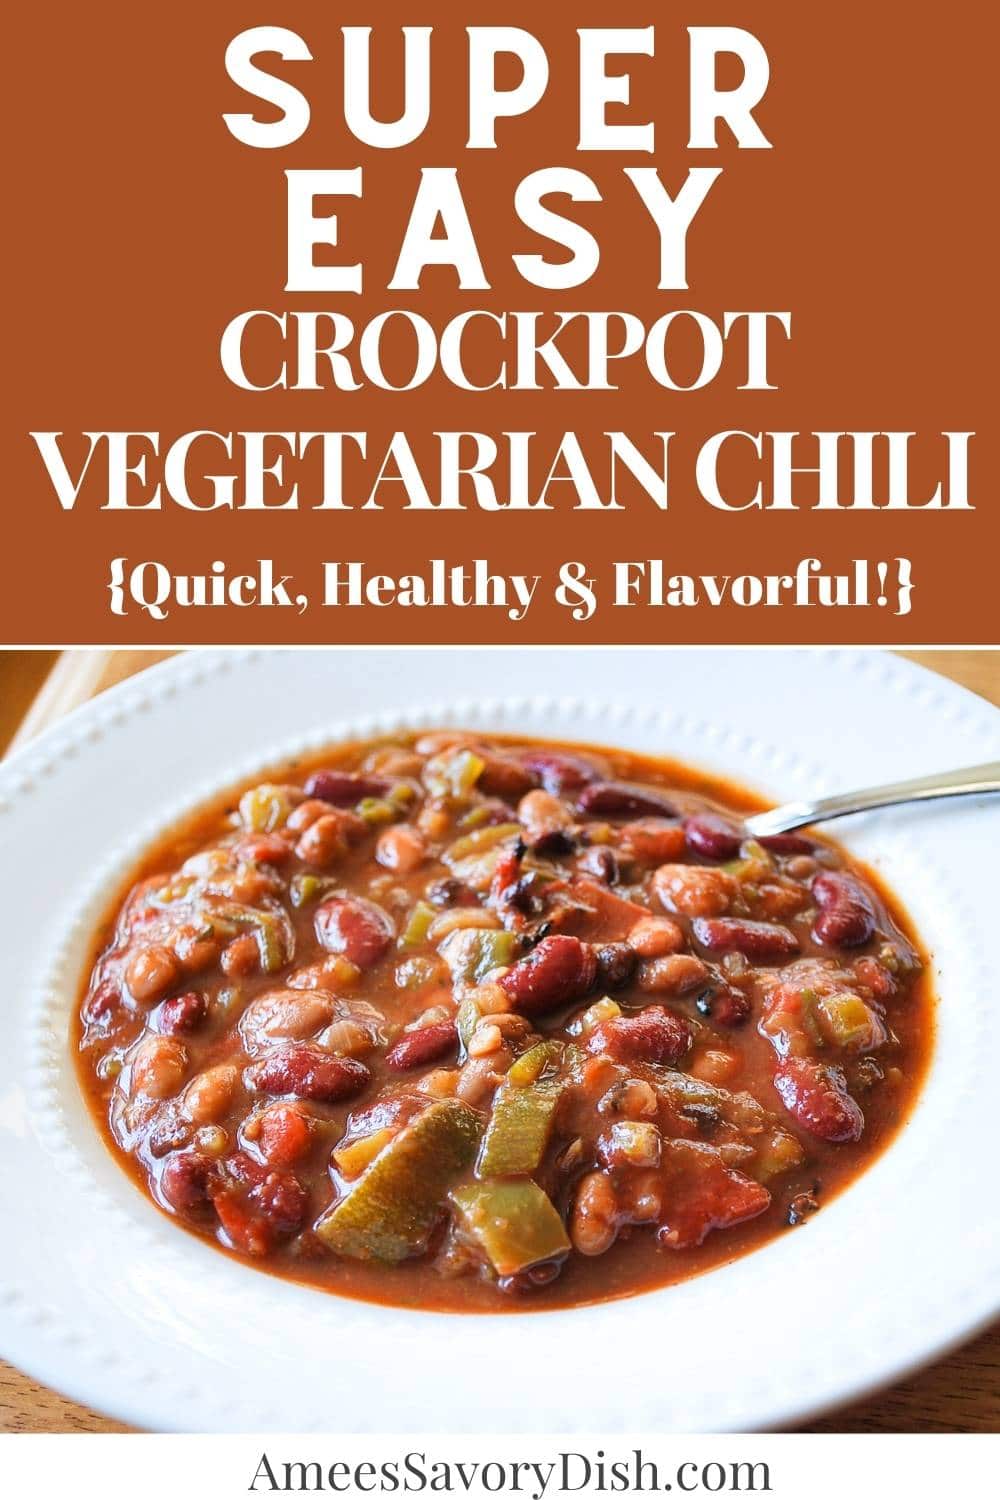 Make this incredibly easy Crockpot Baked Bean Chili and let your slow cooker do most of the work! This bean, veggie, and flavor-packed stew-style chili is the perfect meatless meal for weeknights, potlucks, and so much more. via @Ameessavorydish